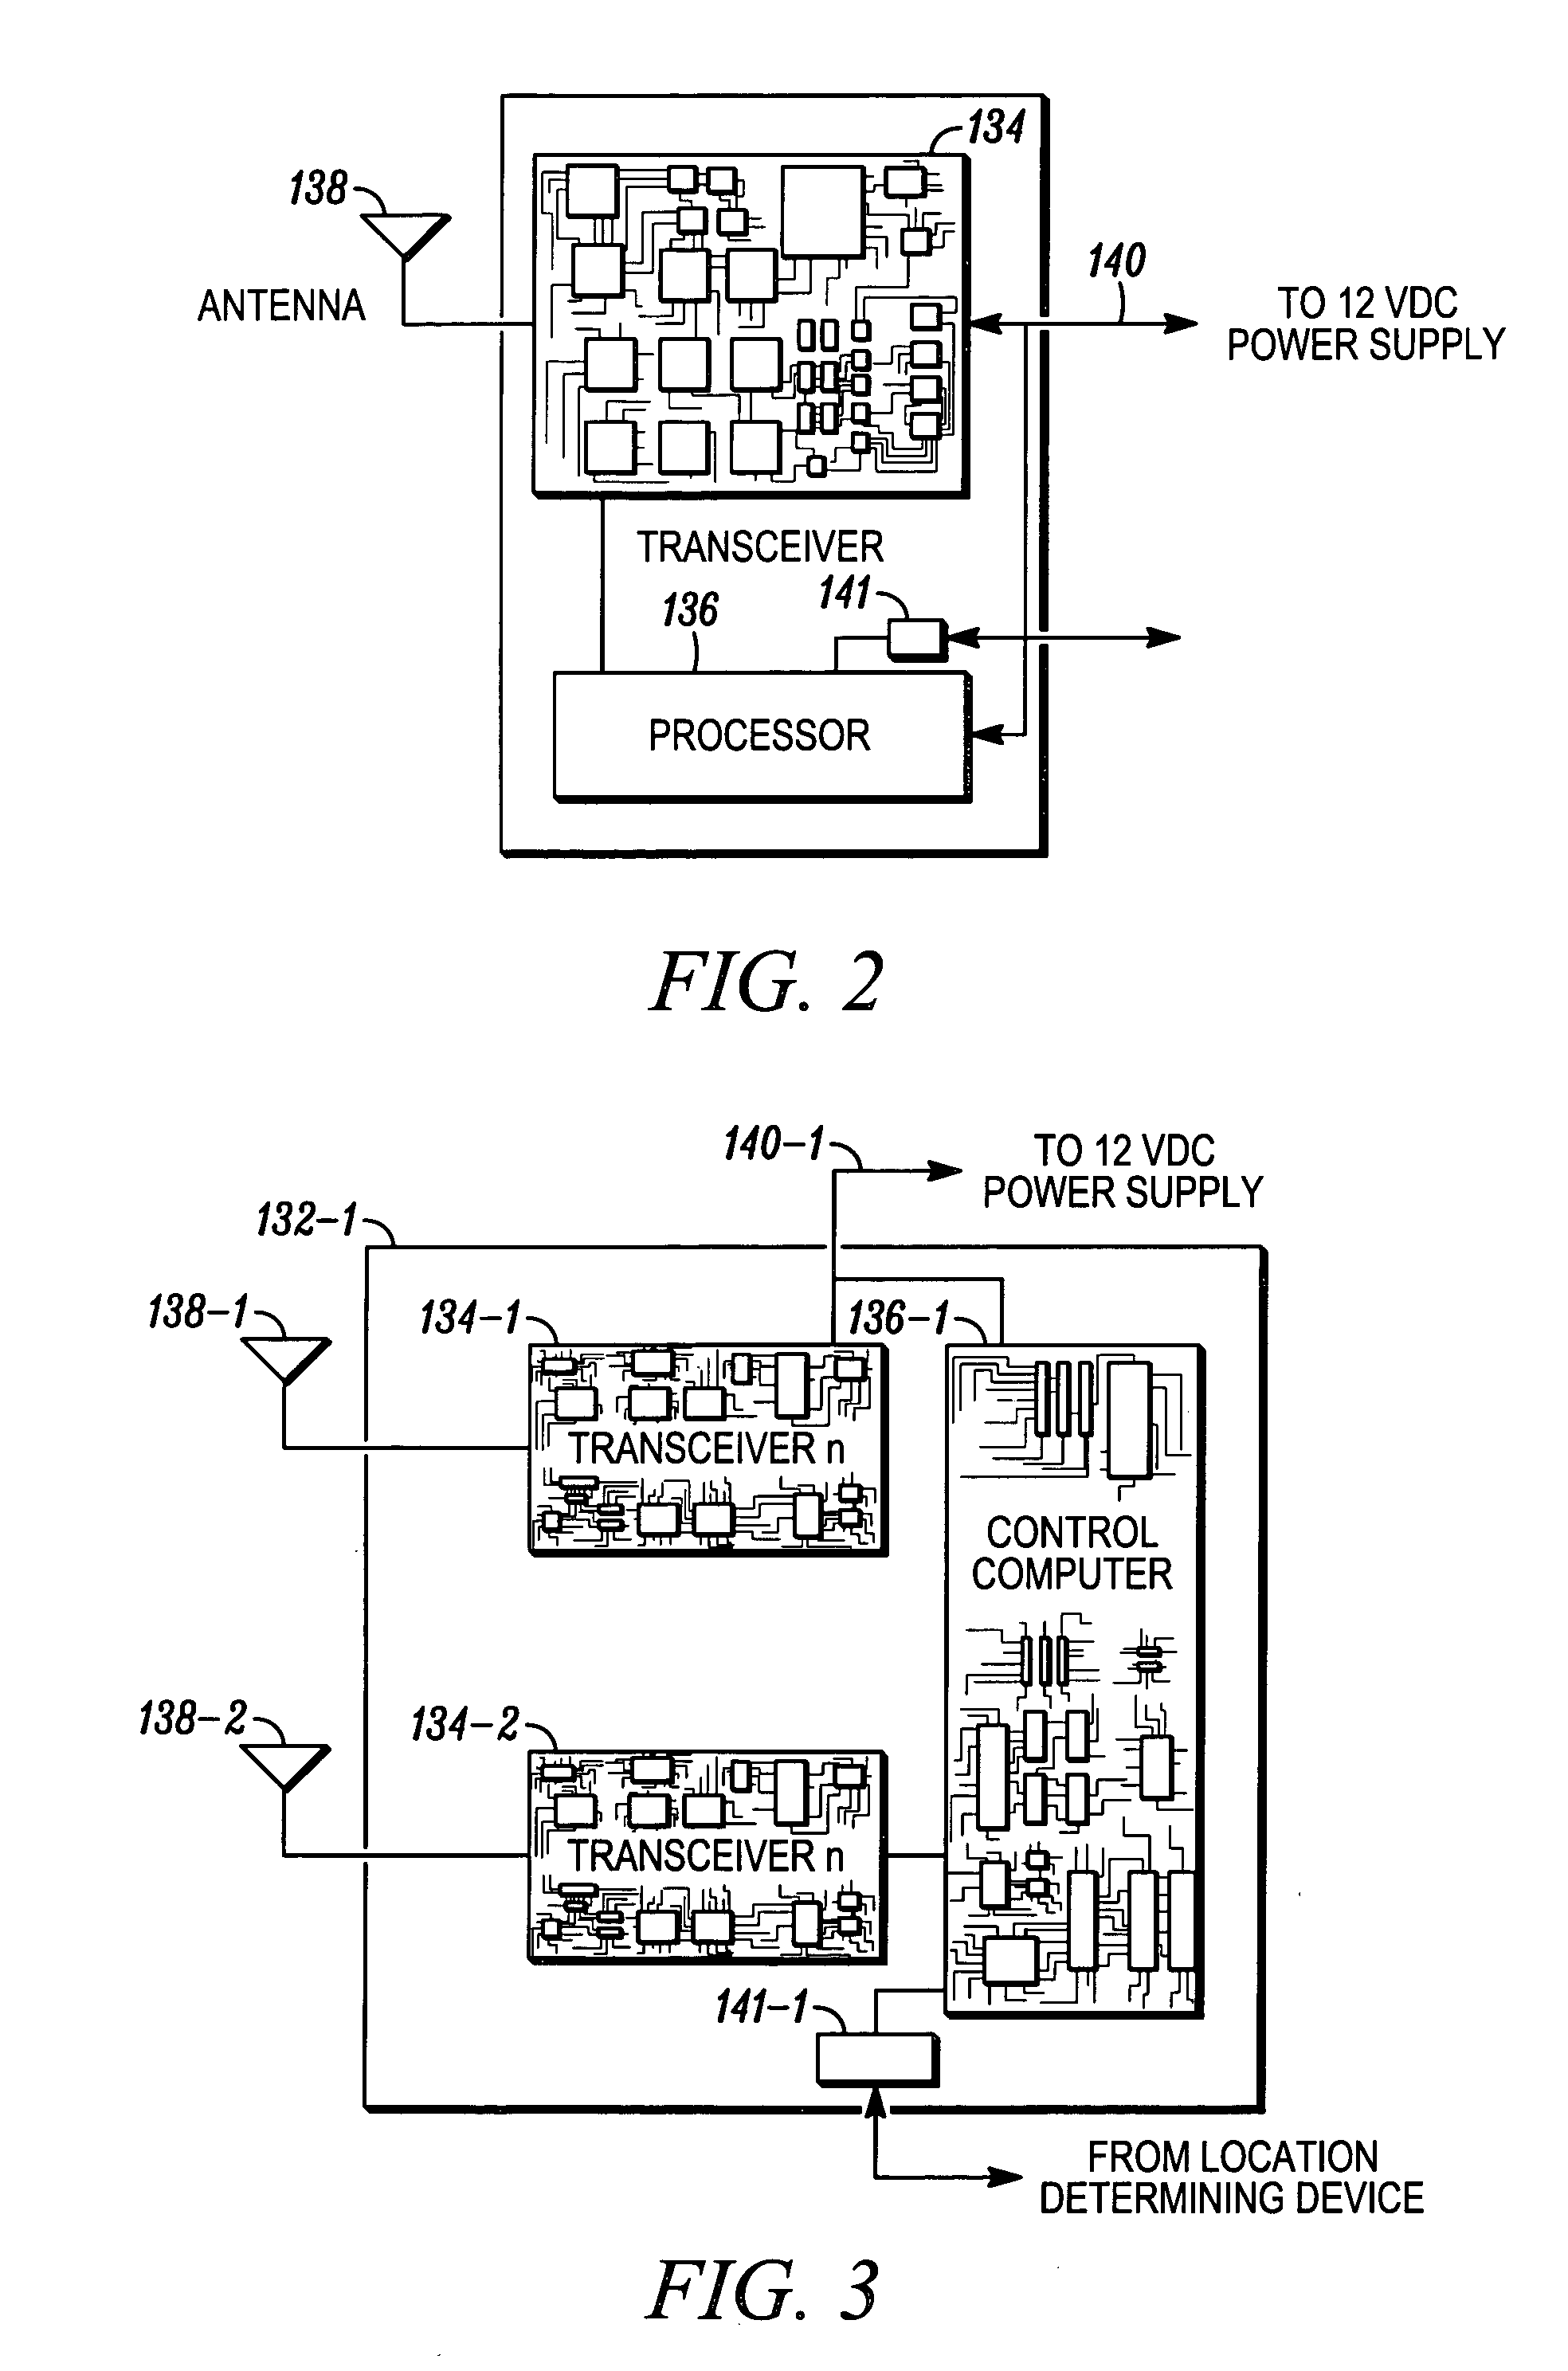 Movable access points and repeaters for minimizing coverage and capacity constraints in a wireless communications network and a method for using the same